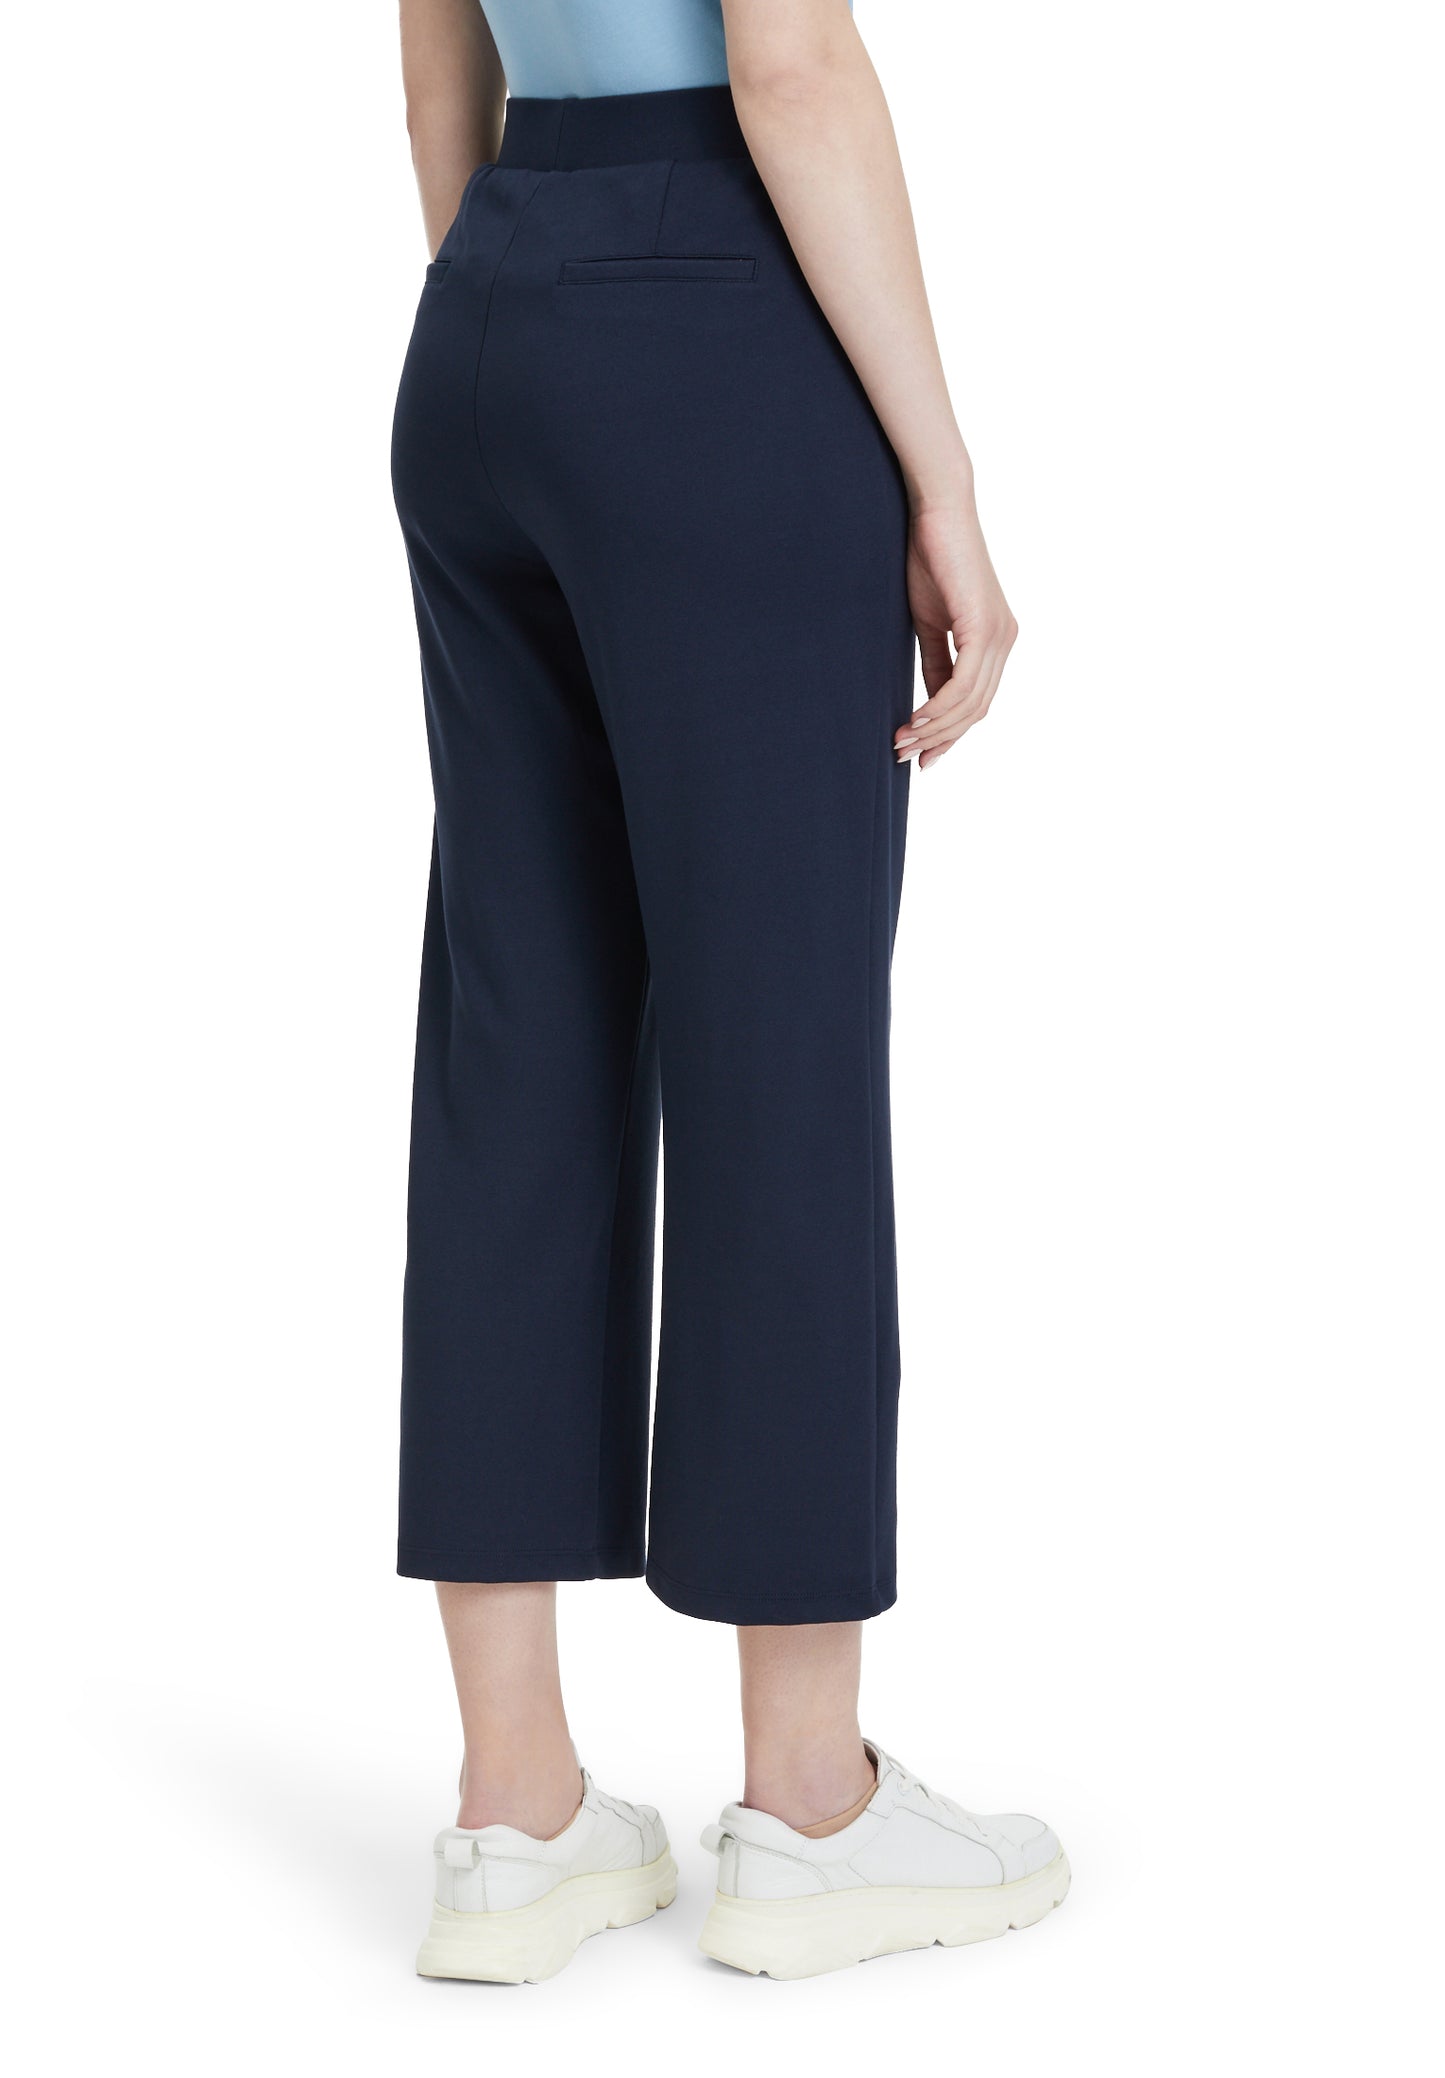 Trousers casual 3/4 length